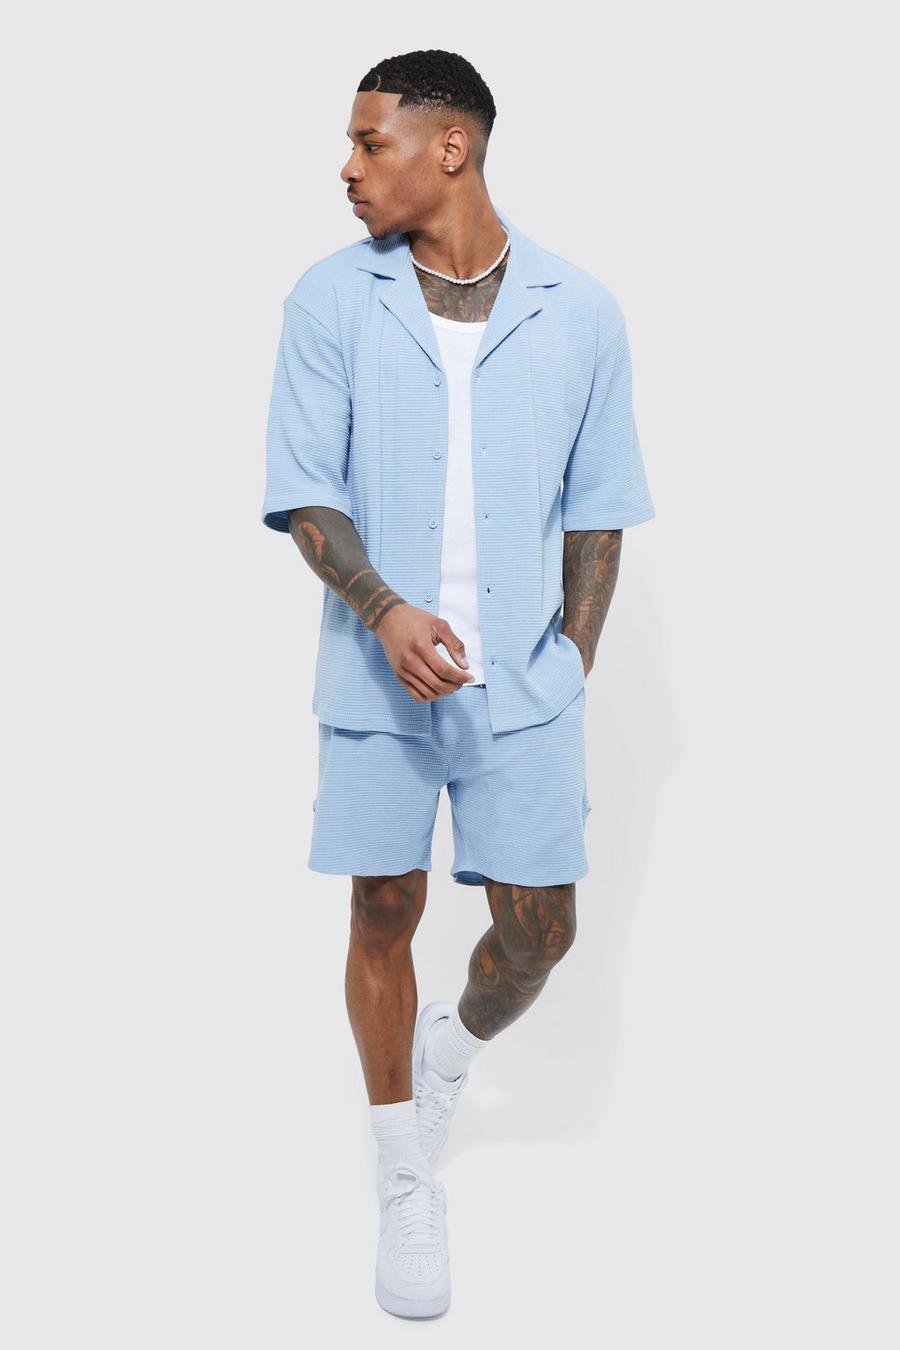 Pale blue Double Knit Jersey Texture Short Sleeve Shirt And Short 